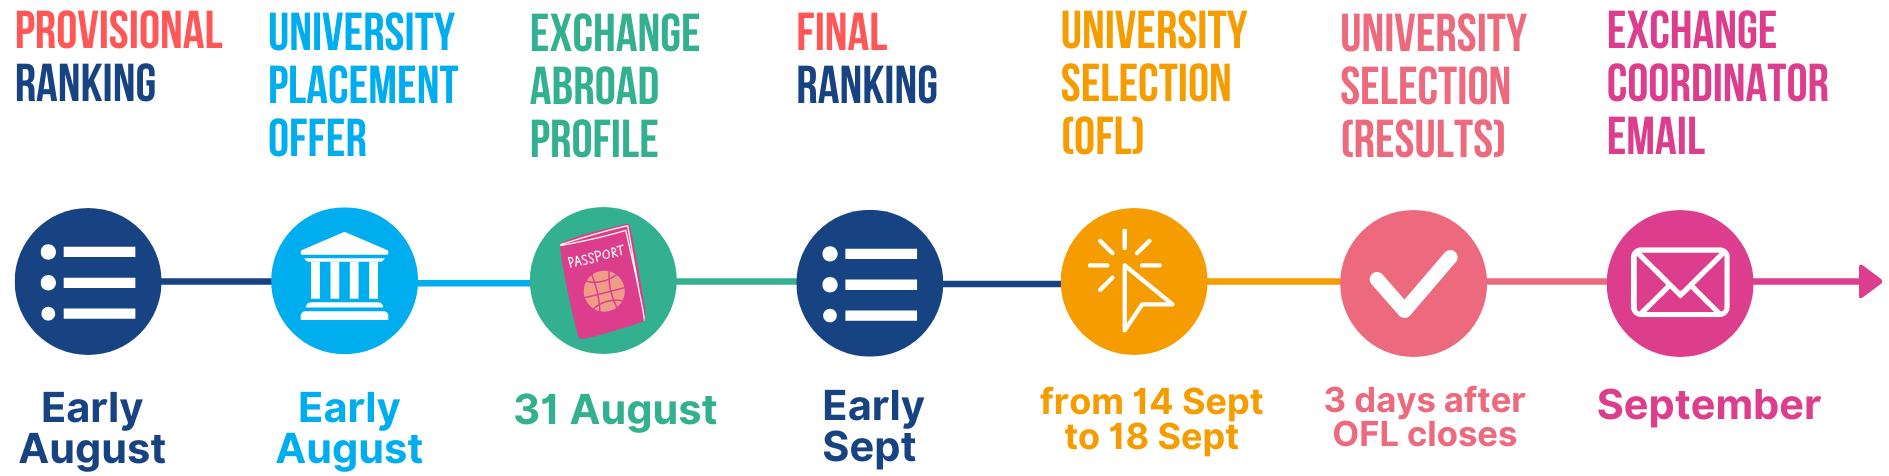 University Selection Timelines (10).png